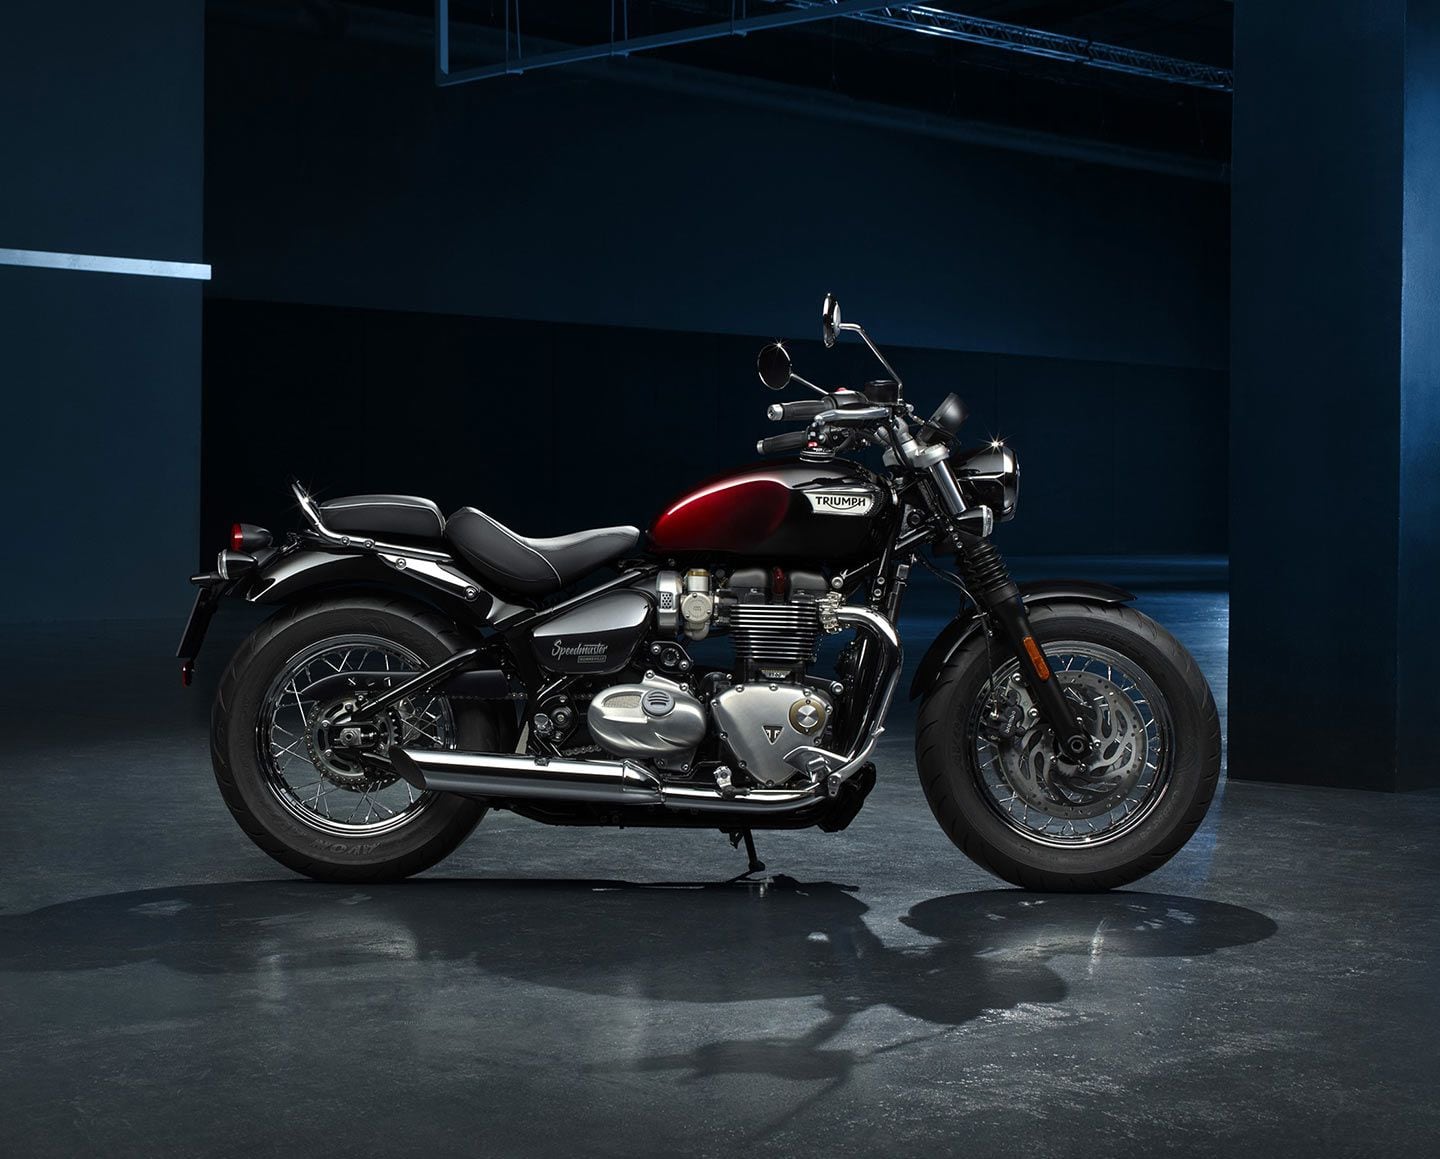 The Bonneville Speedmaster Red Stealth Edition keeps its 1,200c engine but gets an intense new red design.